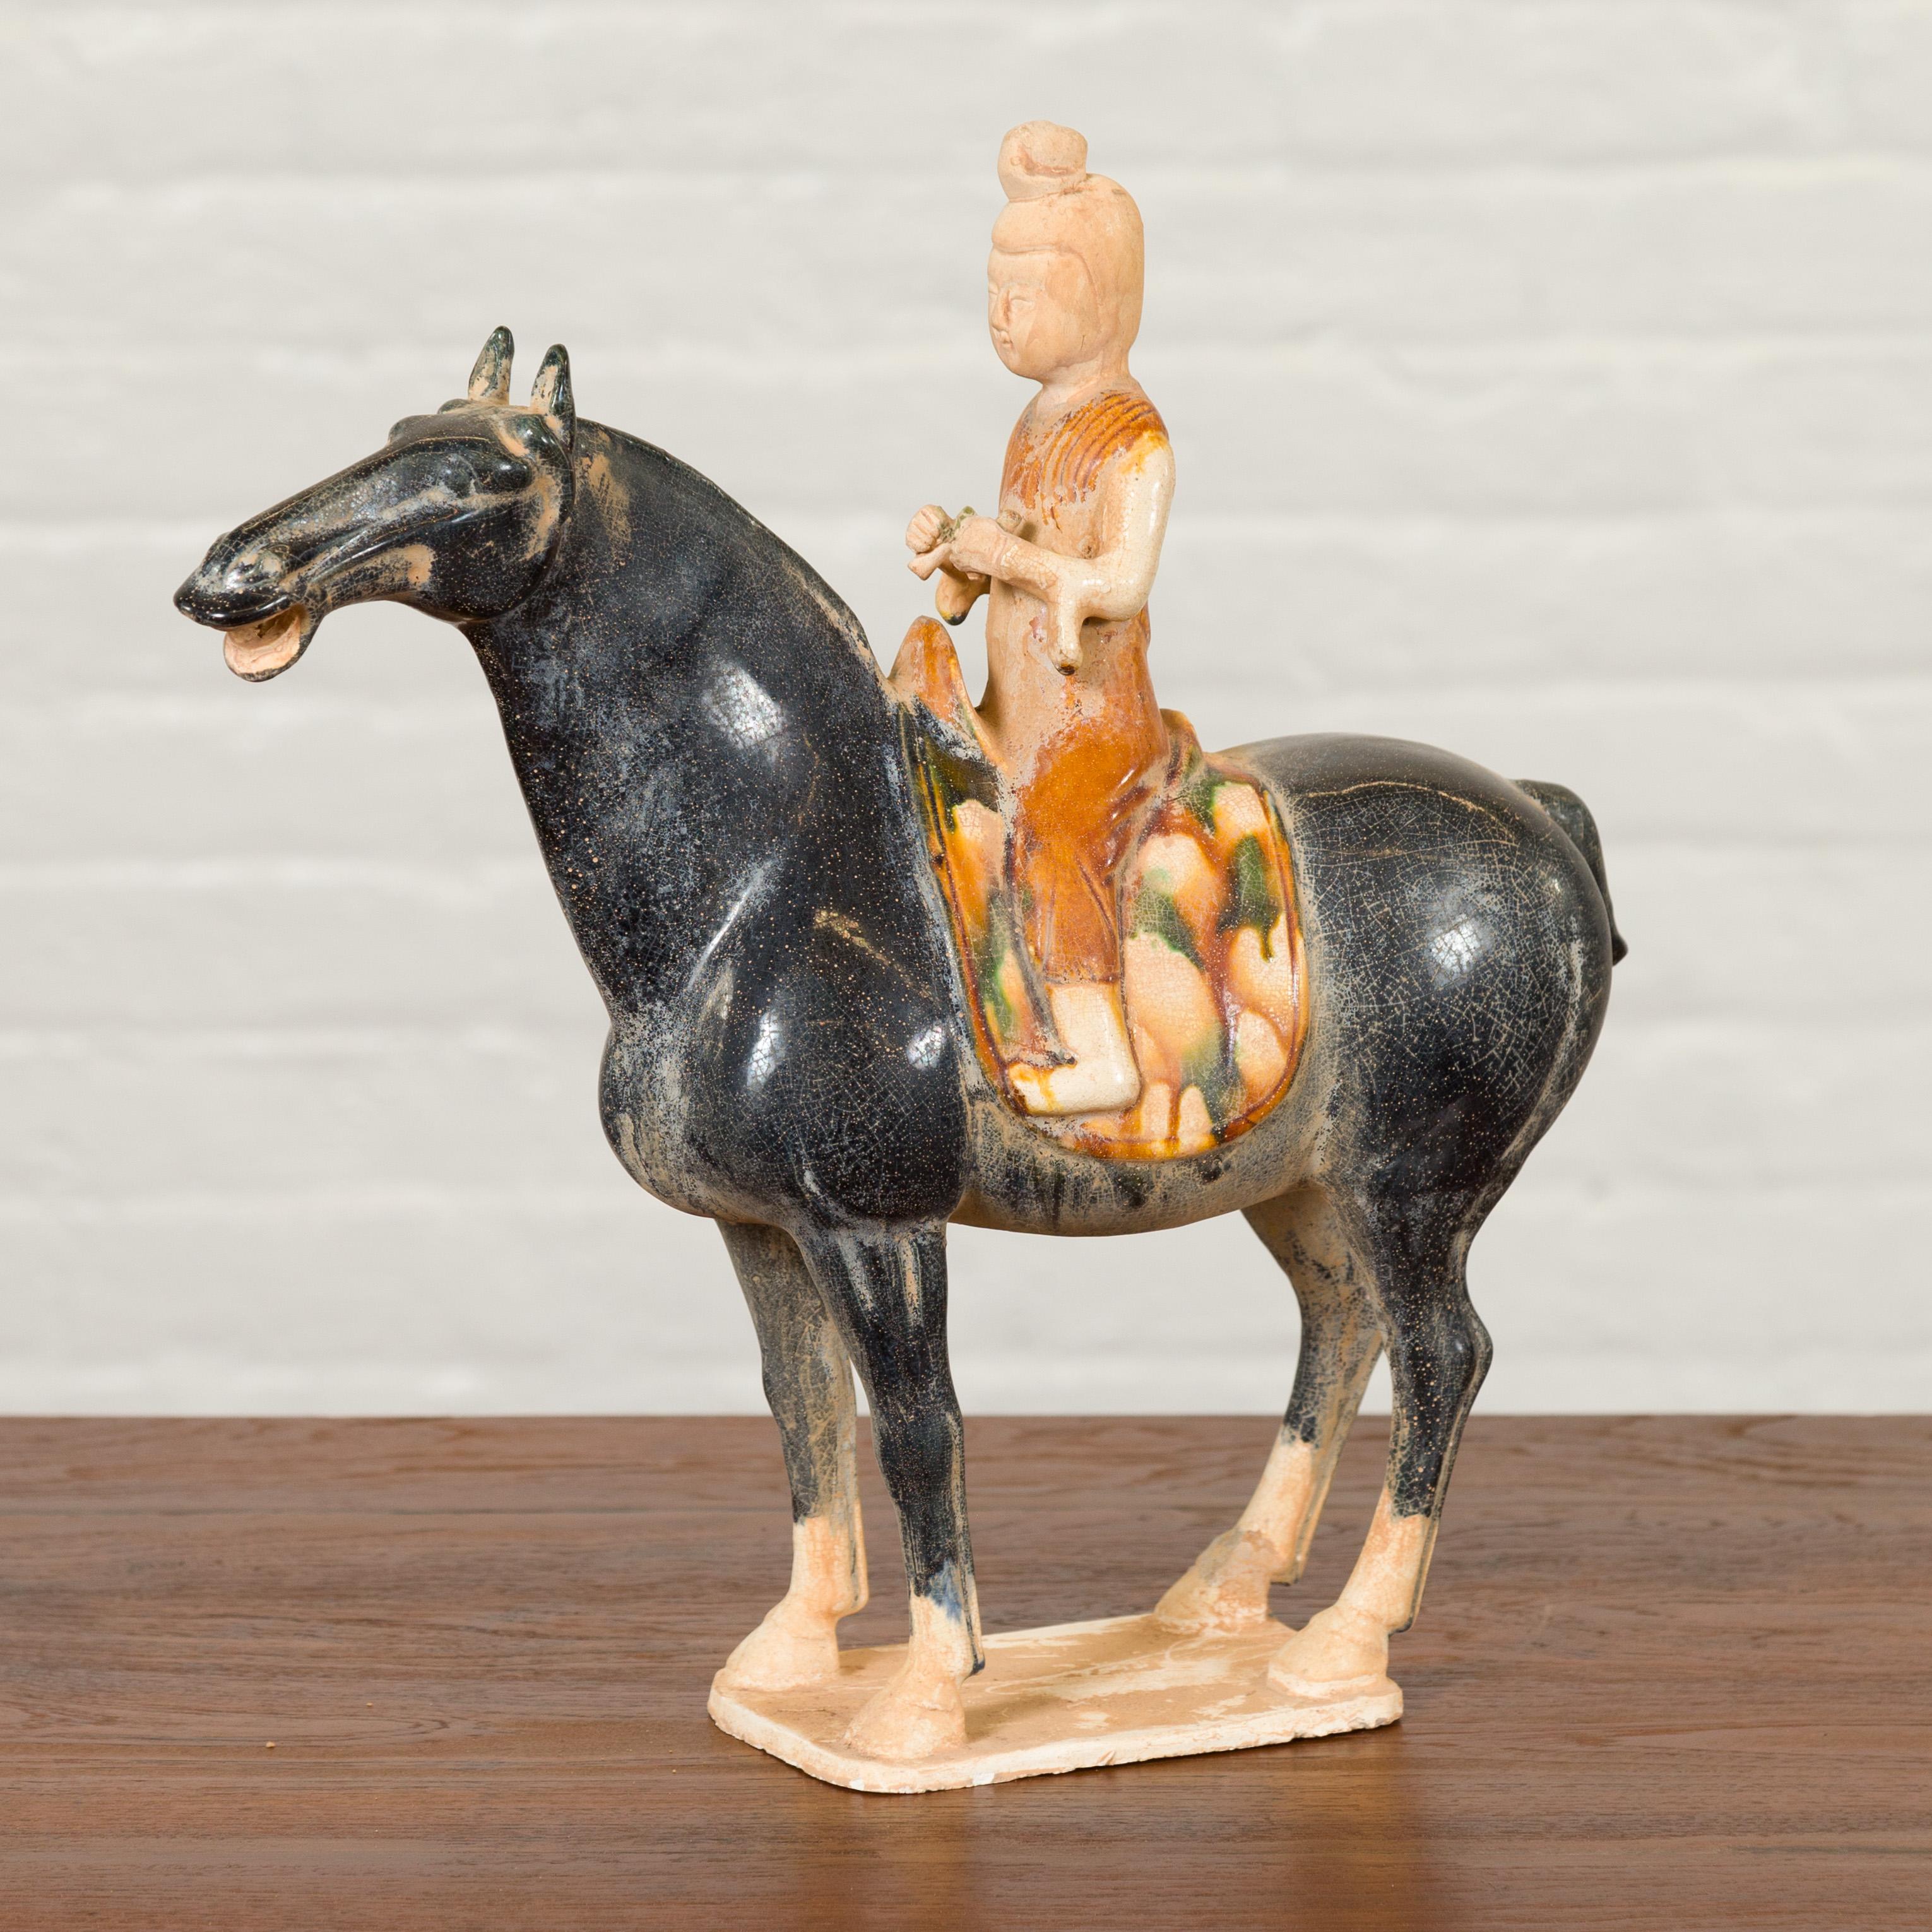 20th Century Chinese Ming Design Glazed Terracotta Horse and Rider Sculpture on Base